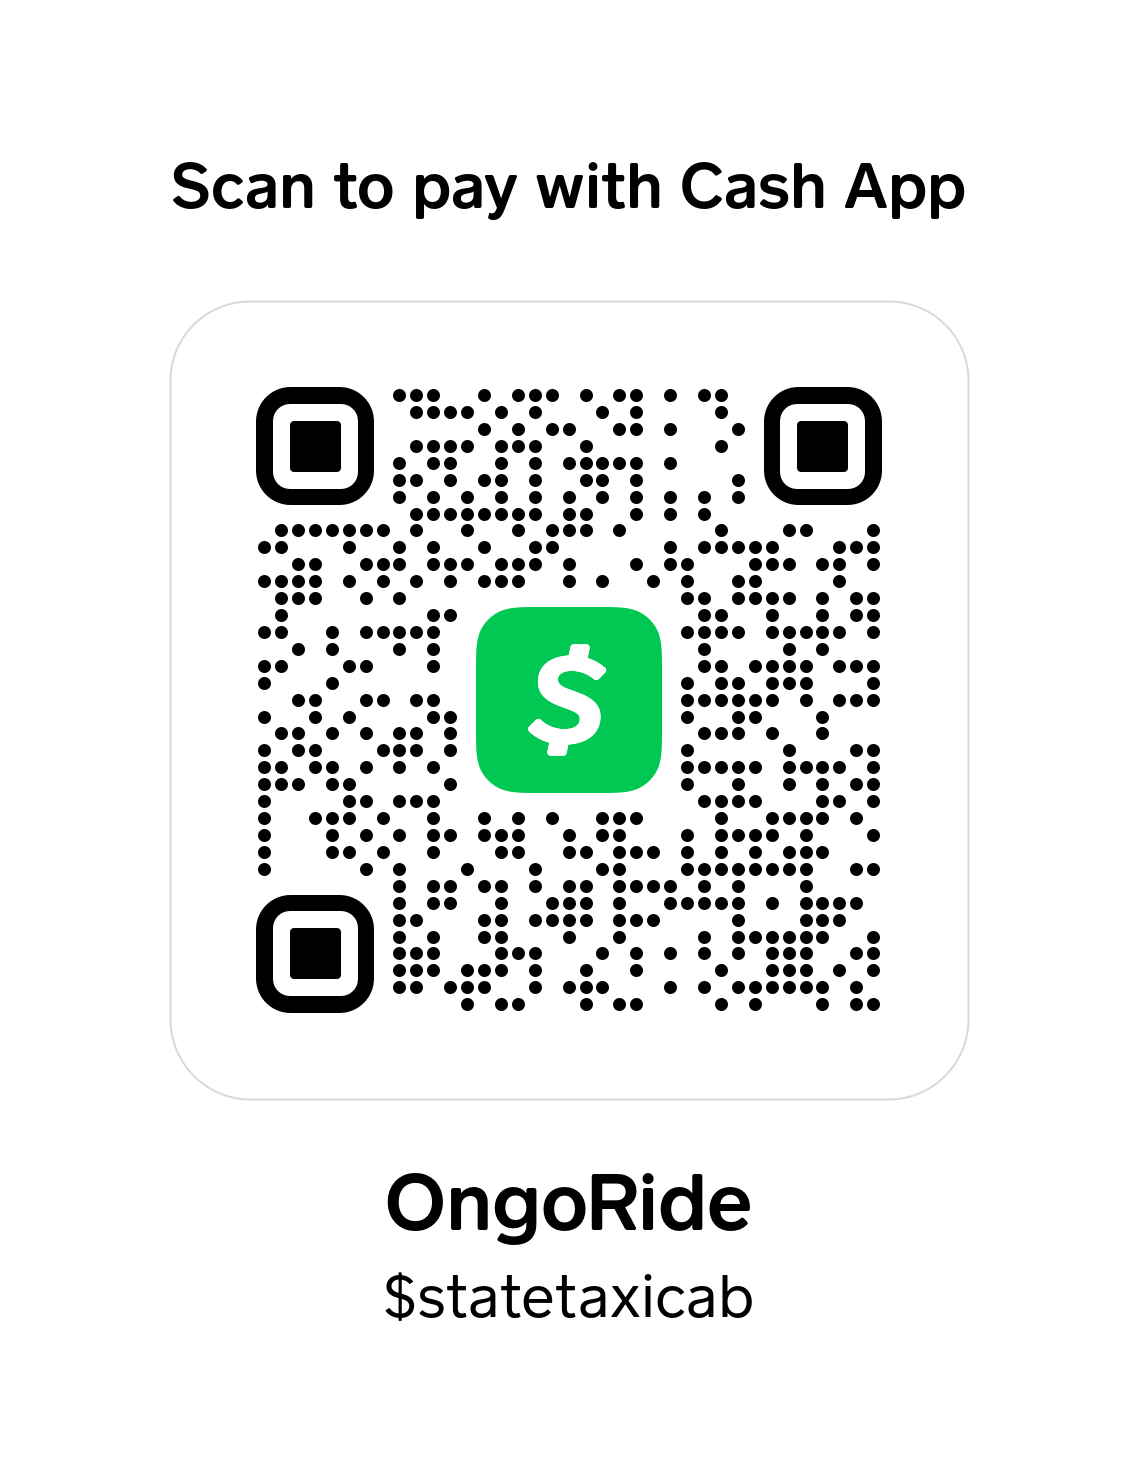 A qr code that says `` scan to pay with cash app ''